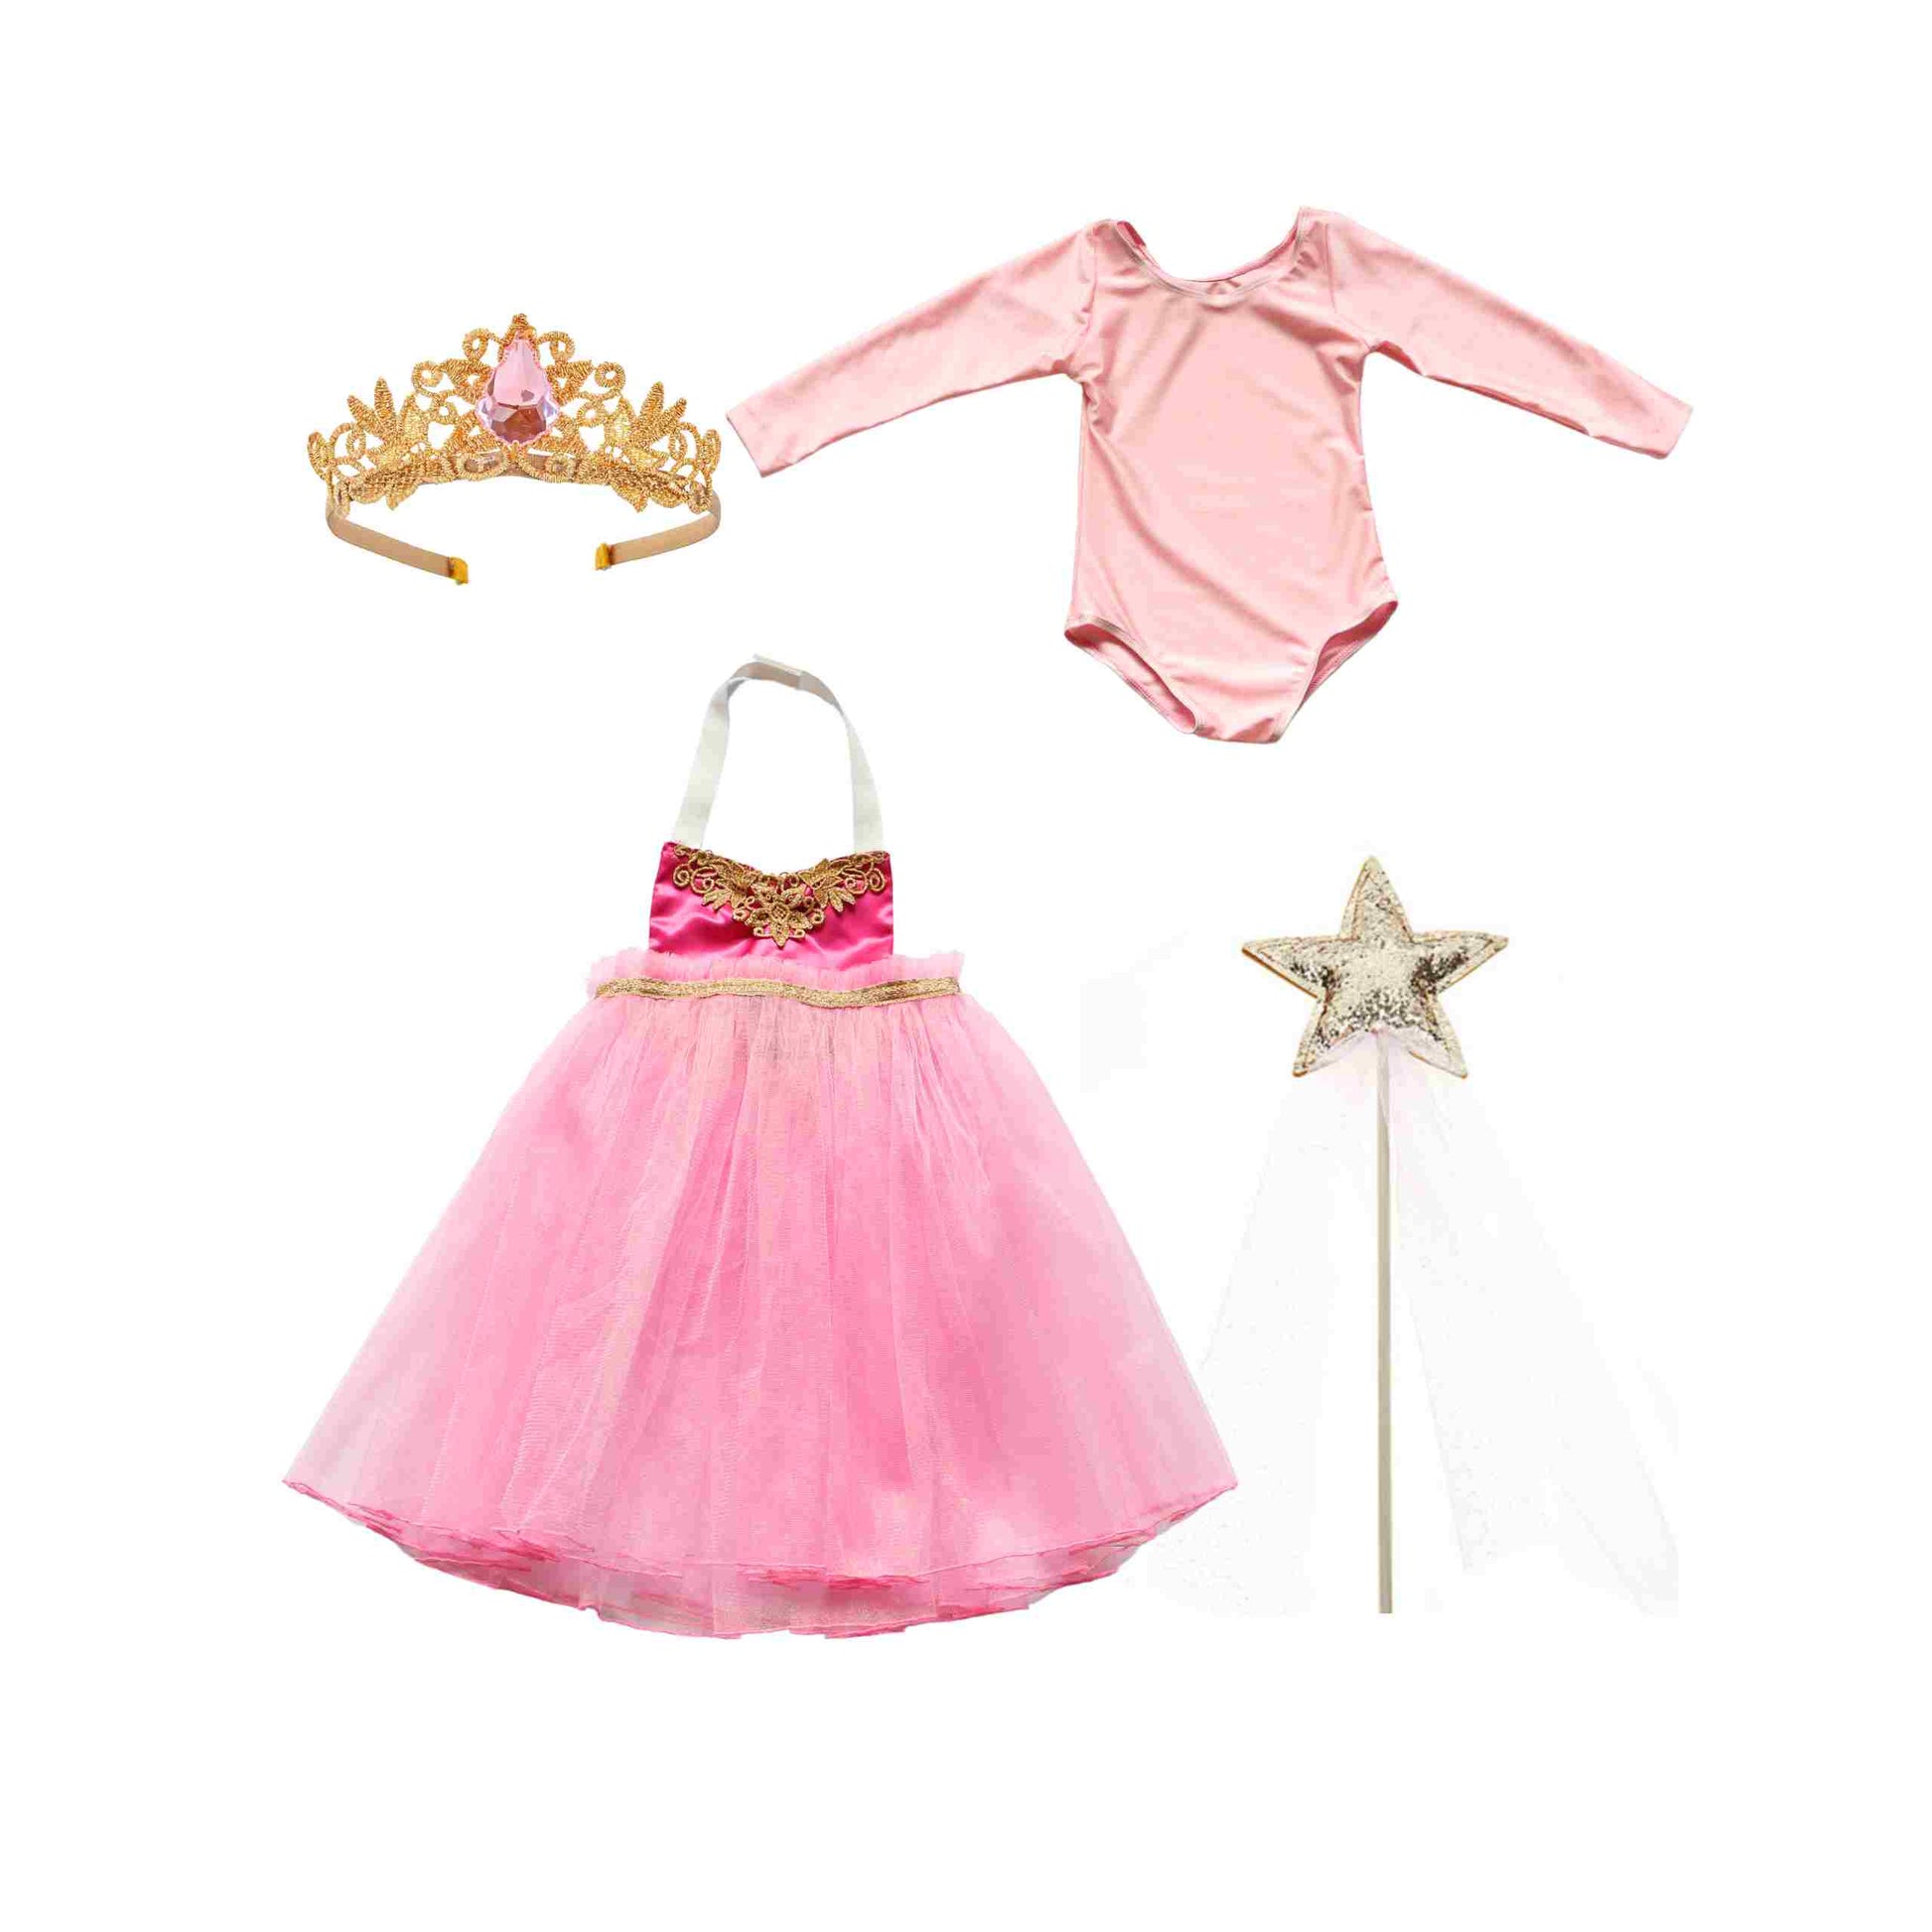 a little girl's pink dress, tiara, and wand